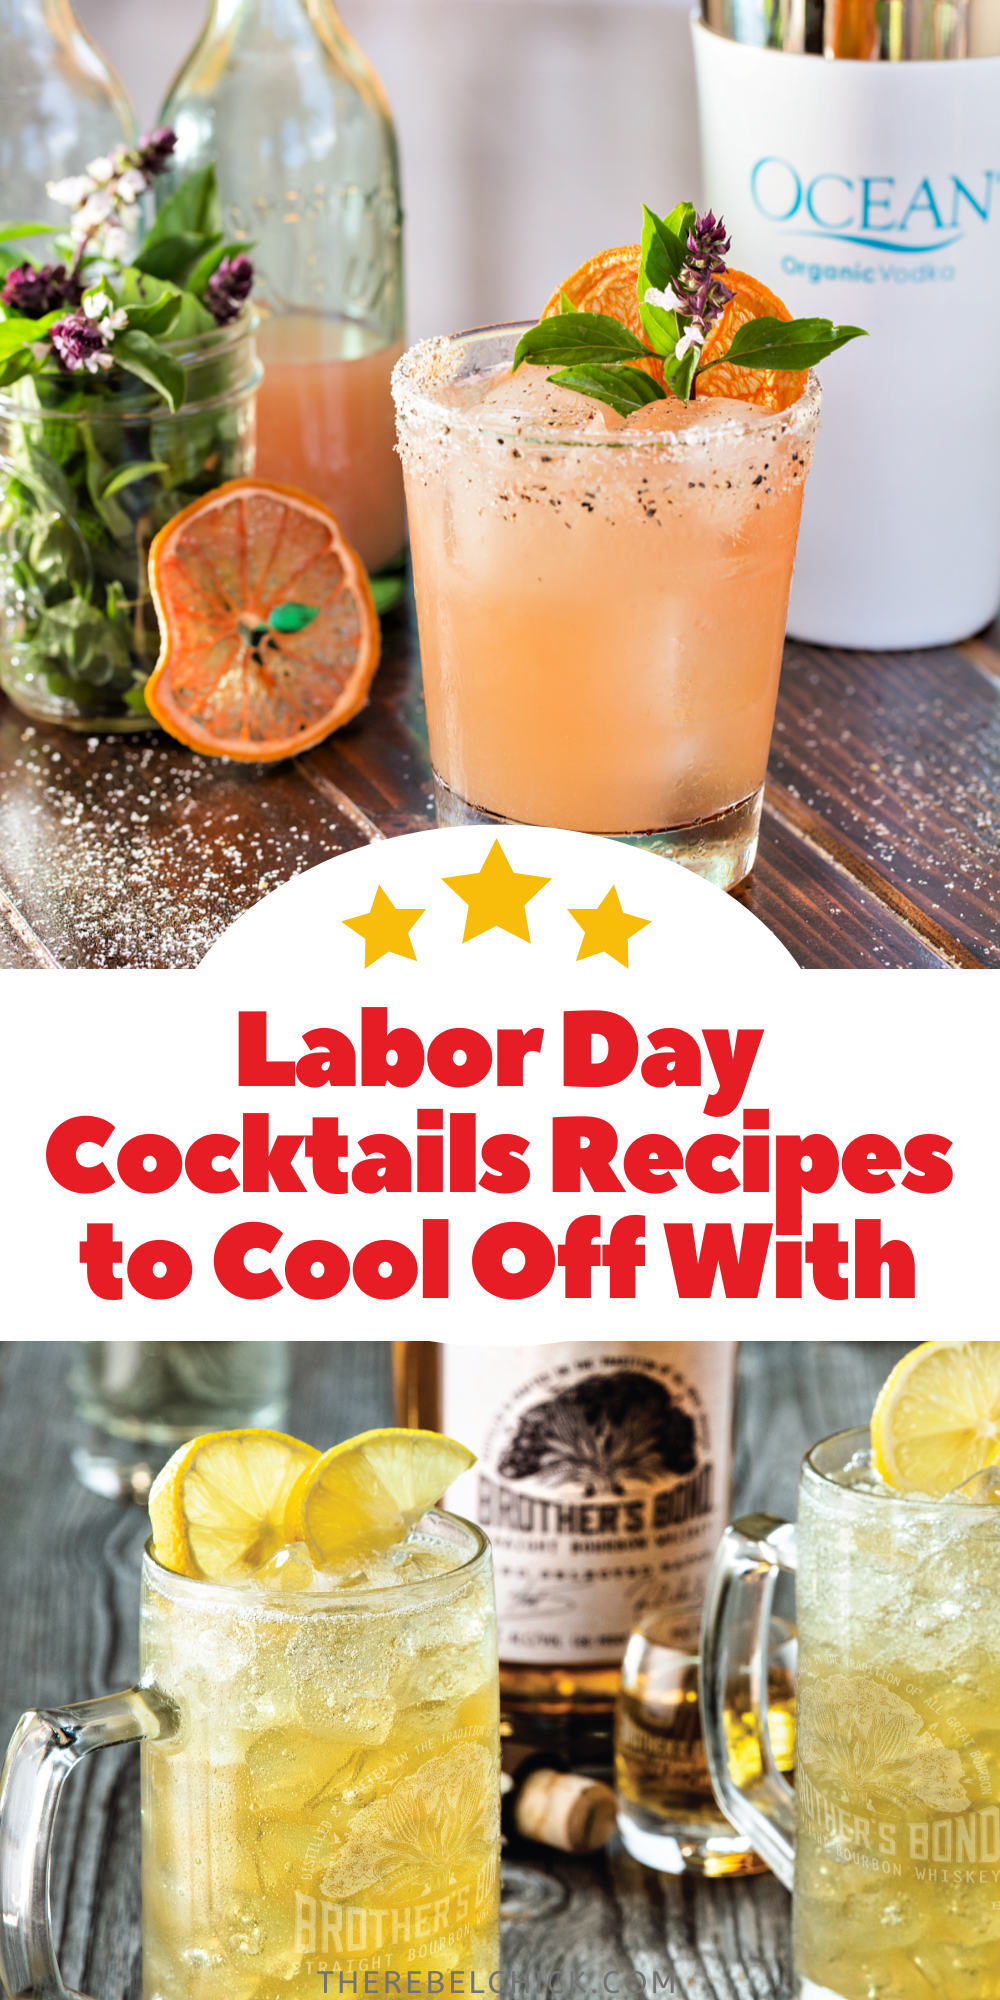 Labor Day Cocktails Recipes to Cool Off With